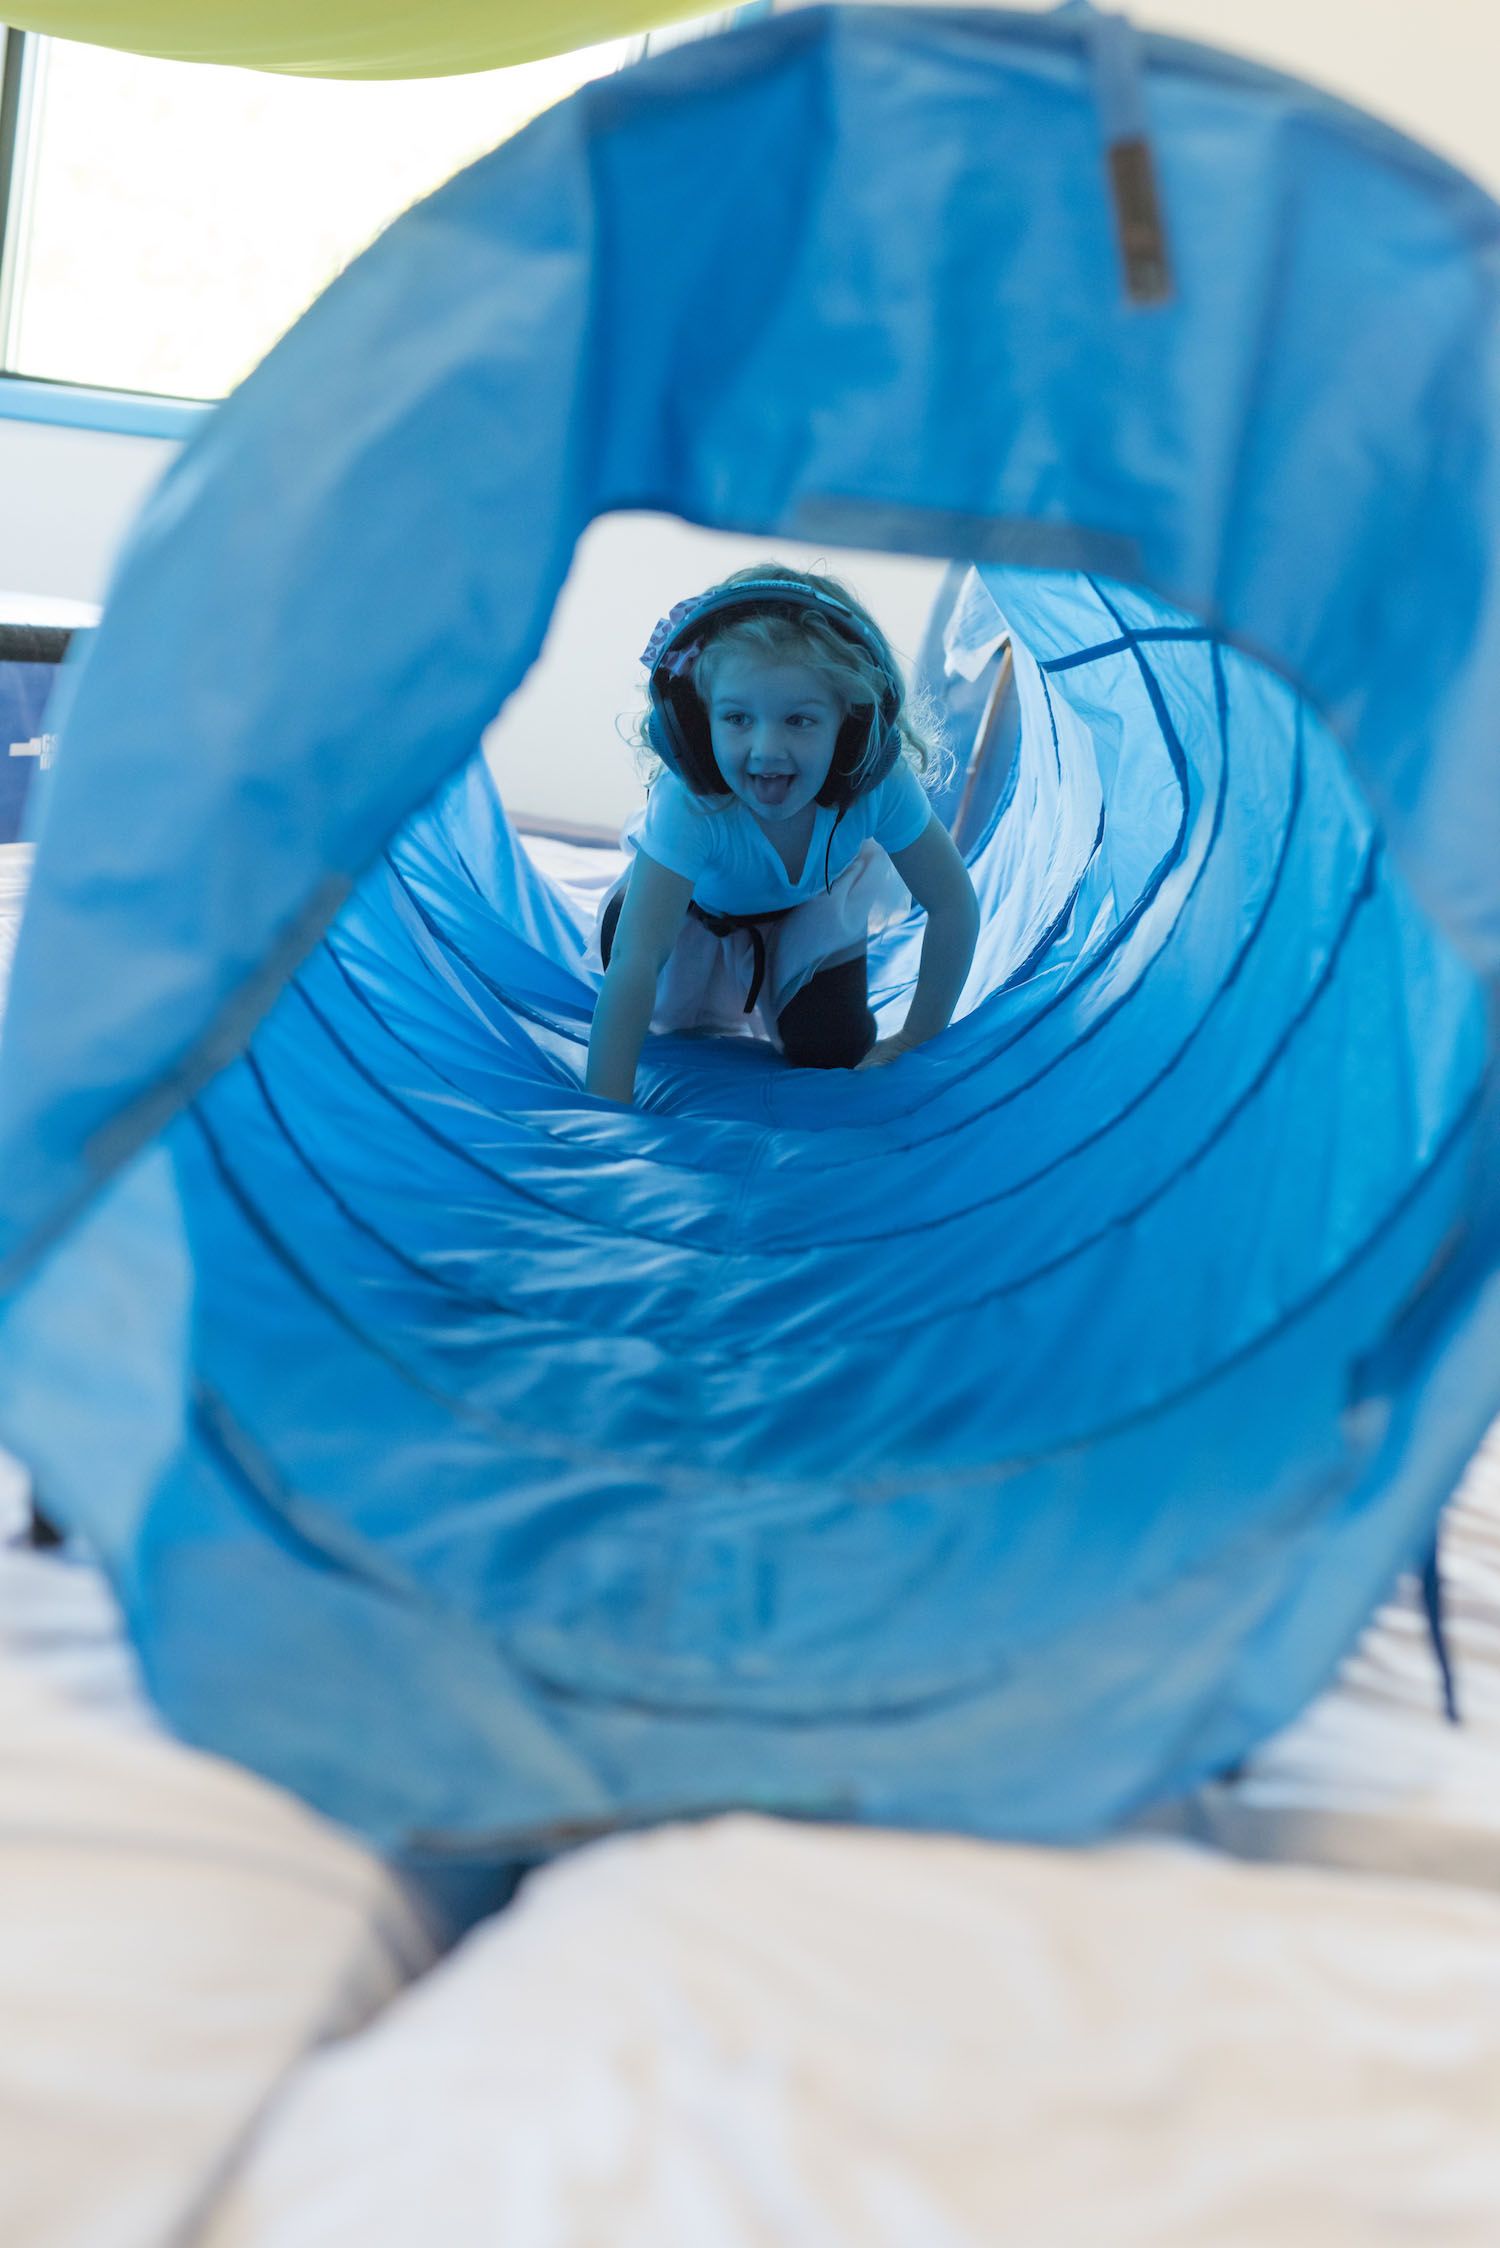 A child crawling through a toy tunnel representing therapeutic music programs offered by South Shore Therapies in Southern MA